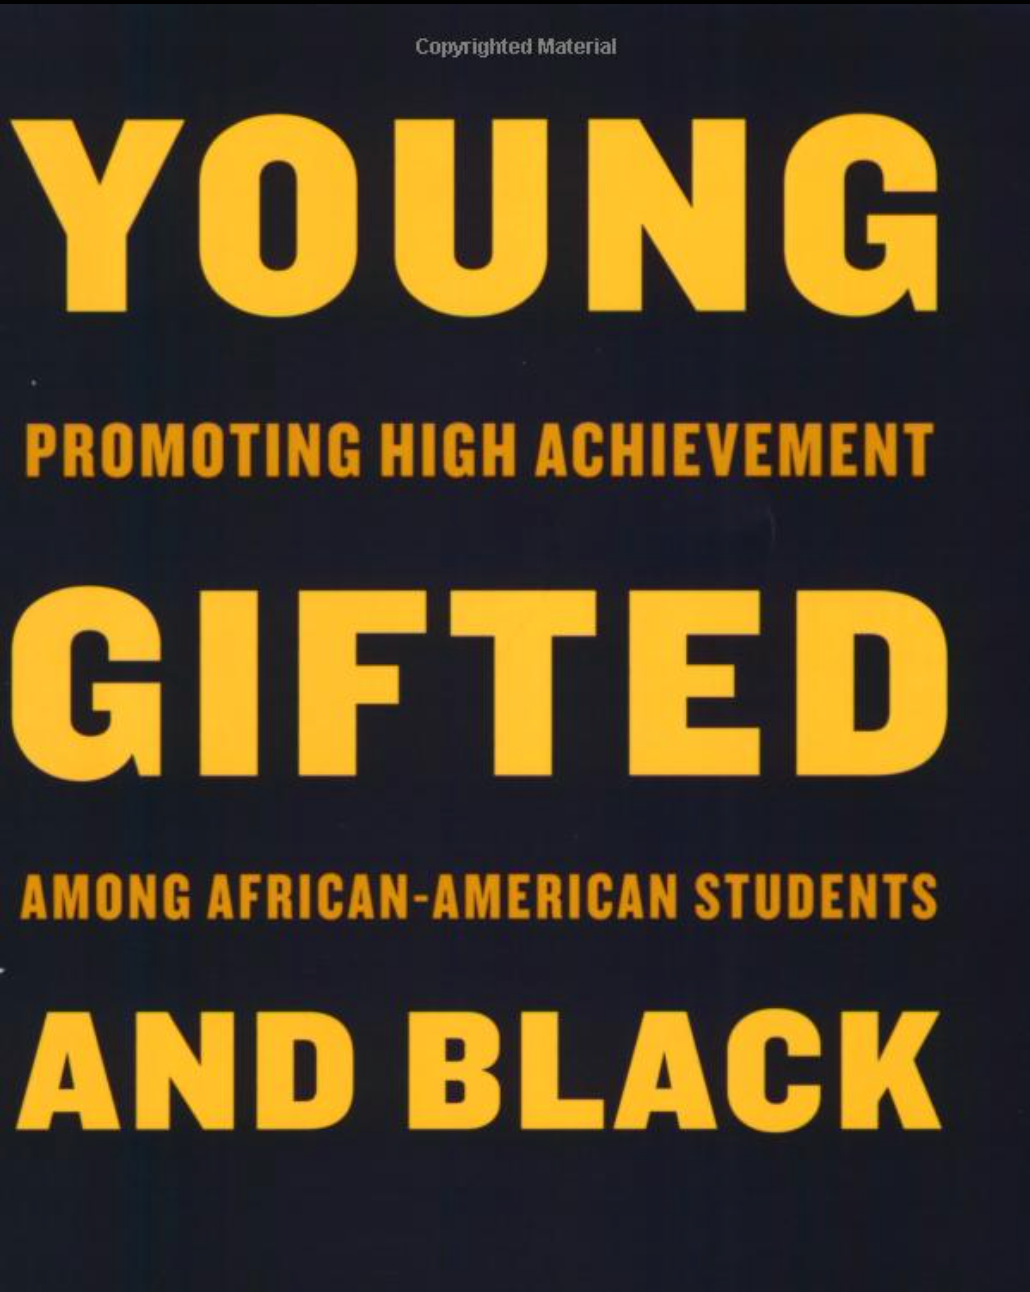 Young, Gifted and Black: Promoting High Achievement among African-American Students